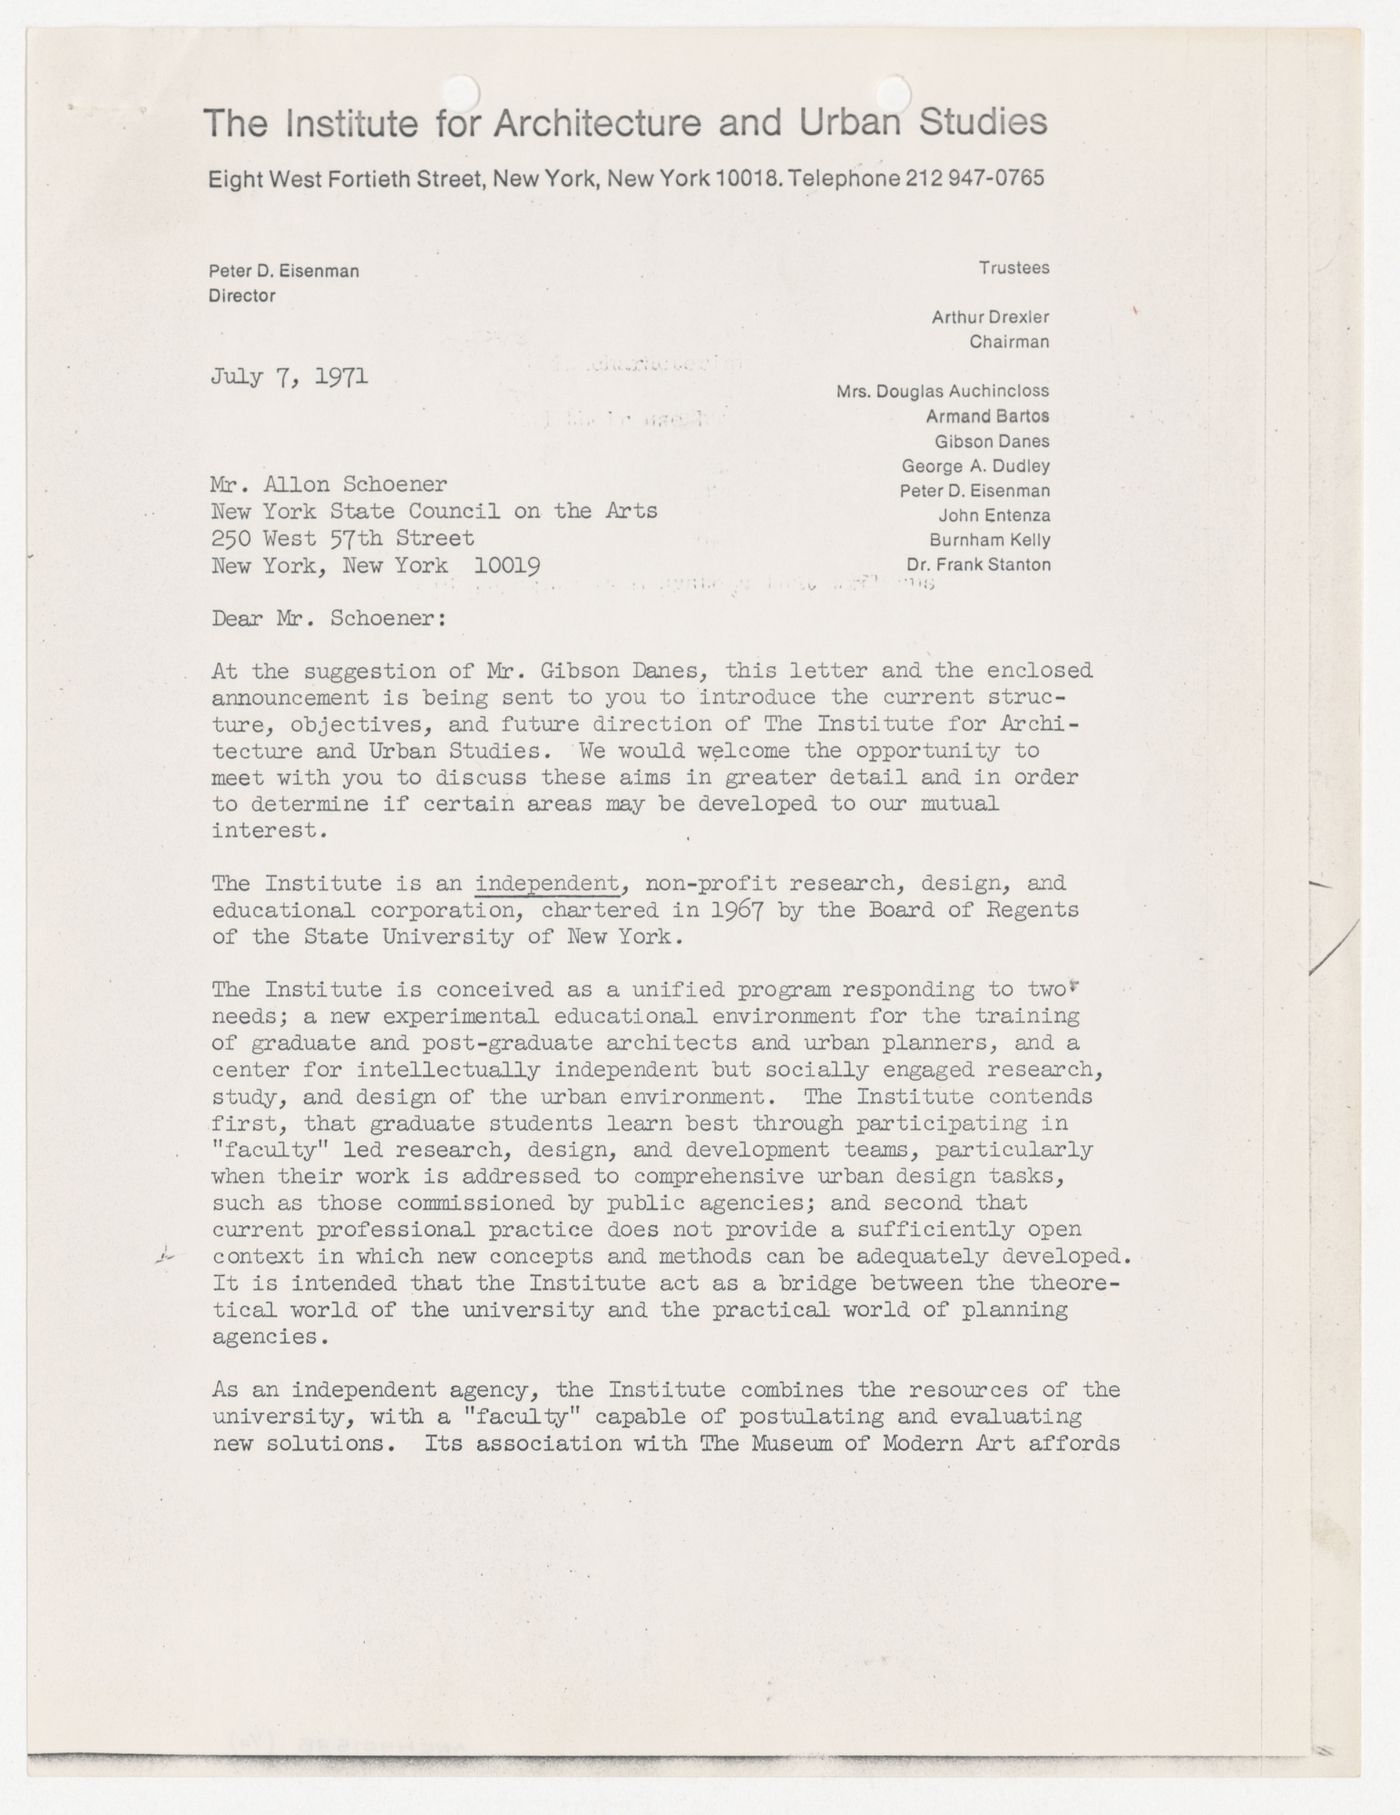 Letter from Peter D. Eisenman to Allon Schoener about support from the New York State Council on the Arts (NYSCA)